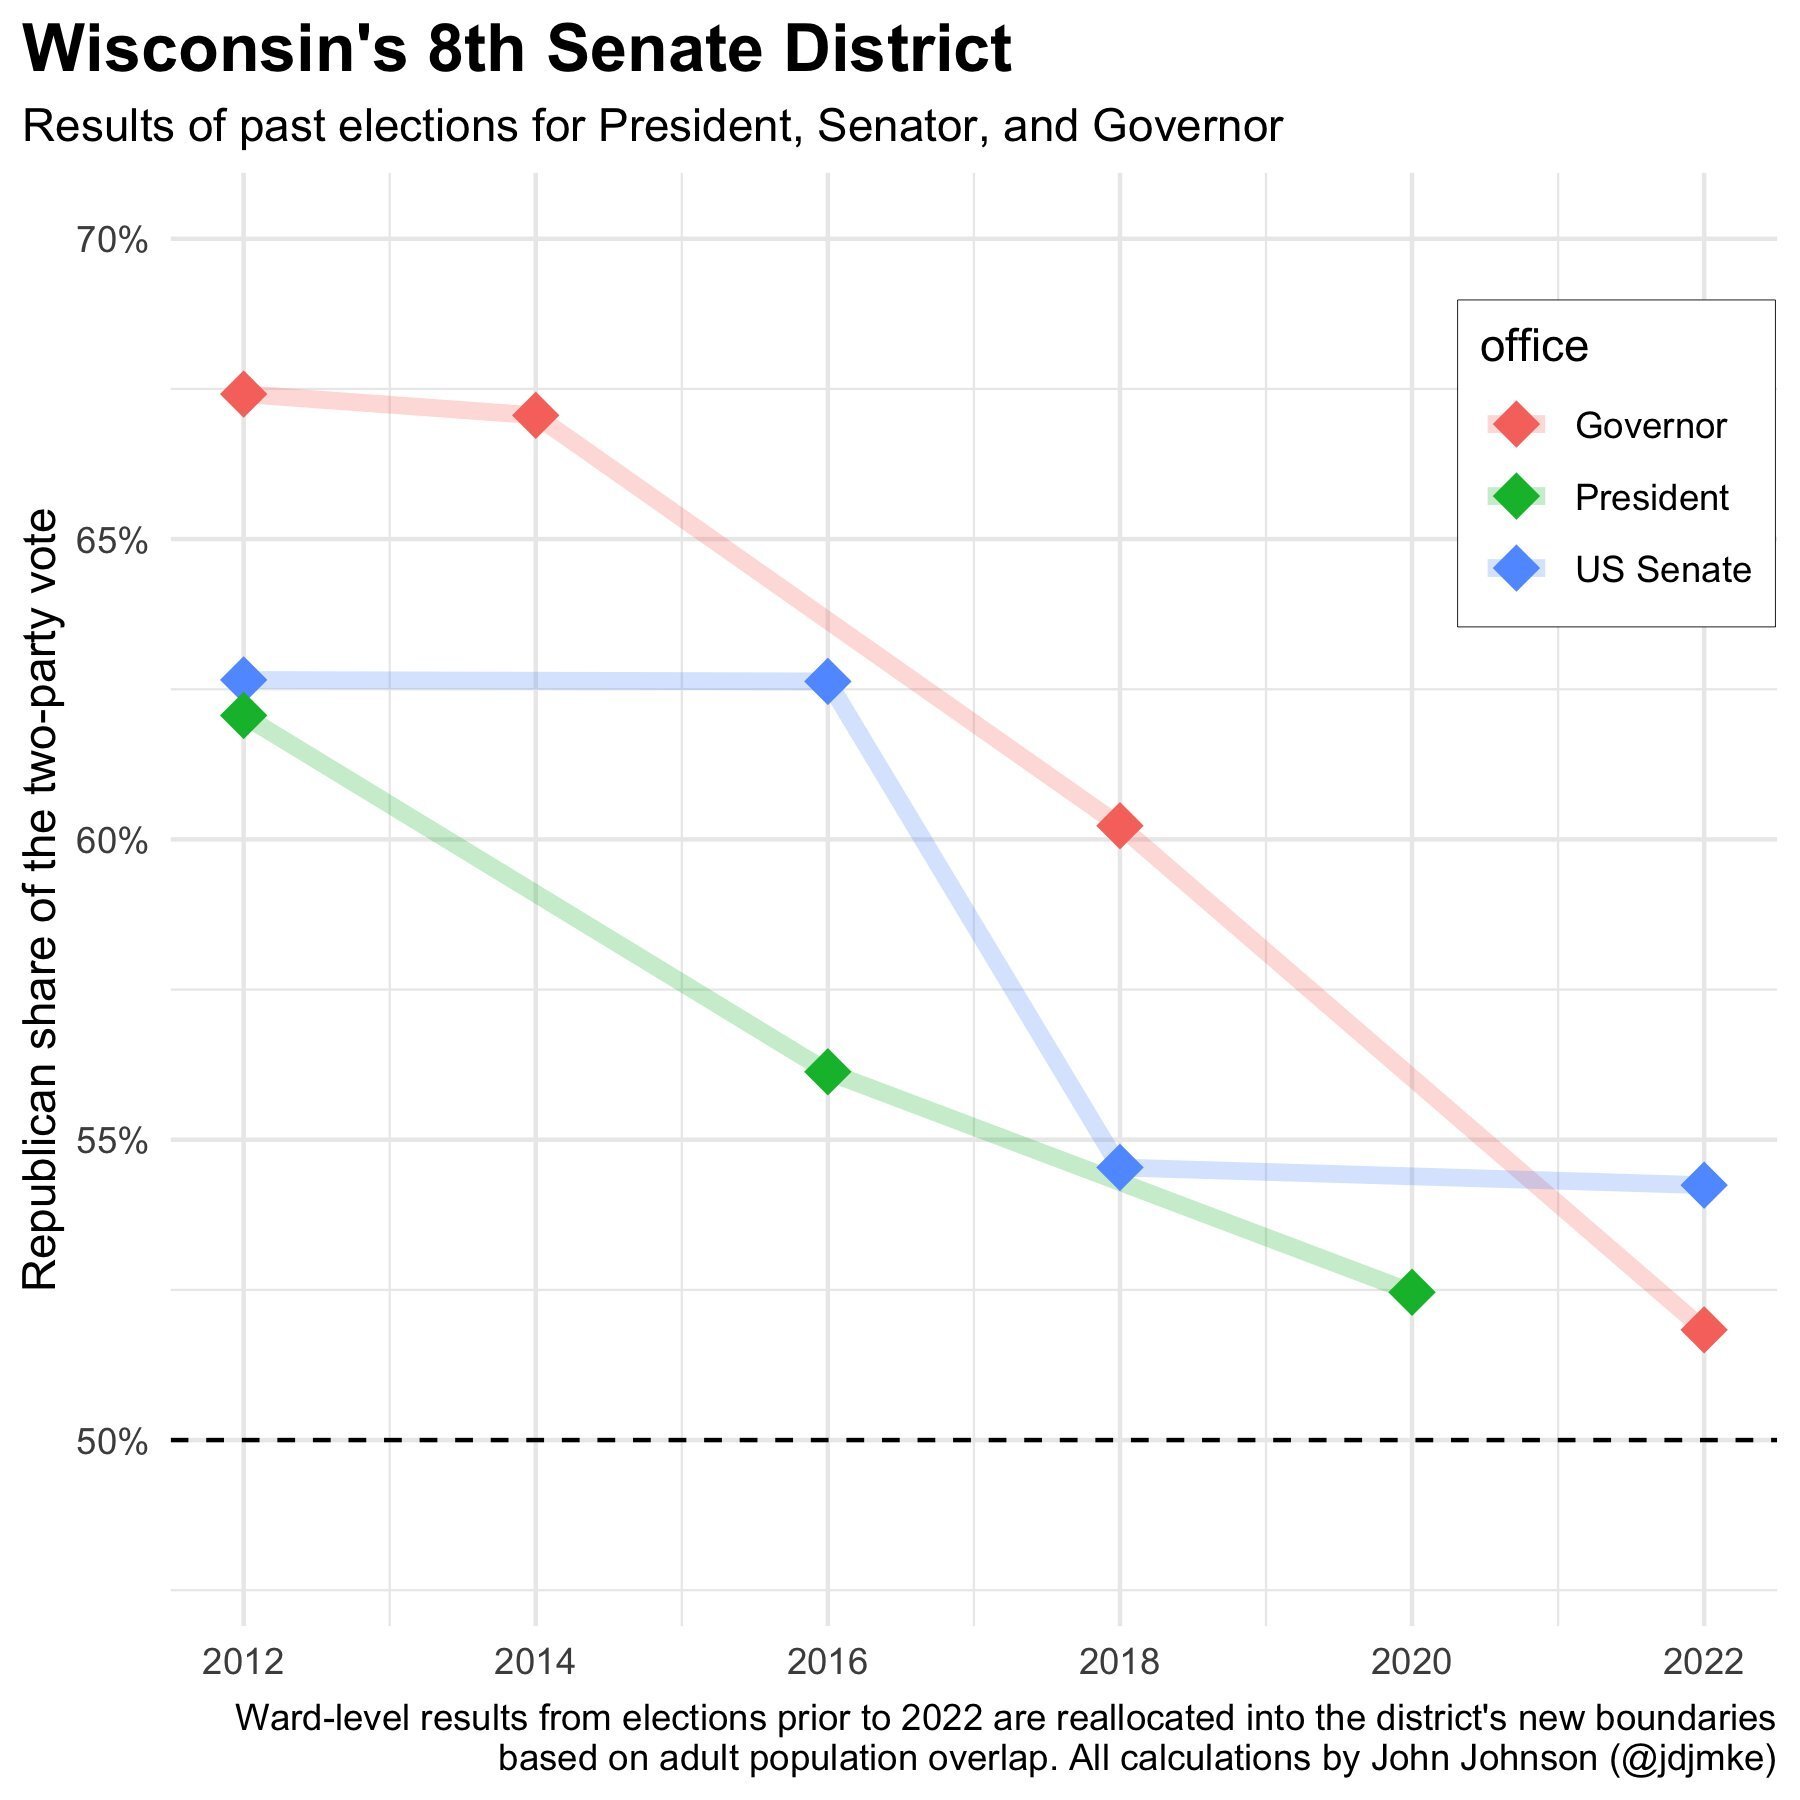 A chart with the title "Wisconsin's 8th Senate District" and subtitle "Results of past elections for president, senator and governor" shows the Republican share of the two-party vote for fall elections in 2012, 2014, 2016, 2018, 2020 and 2020 for the three offices.